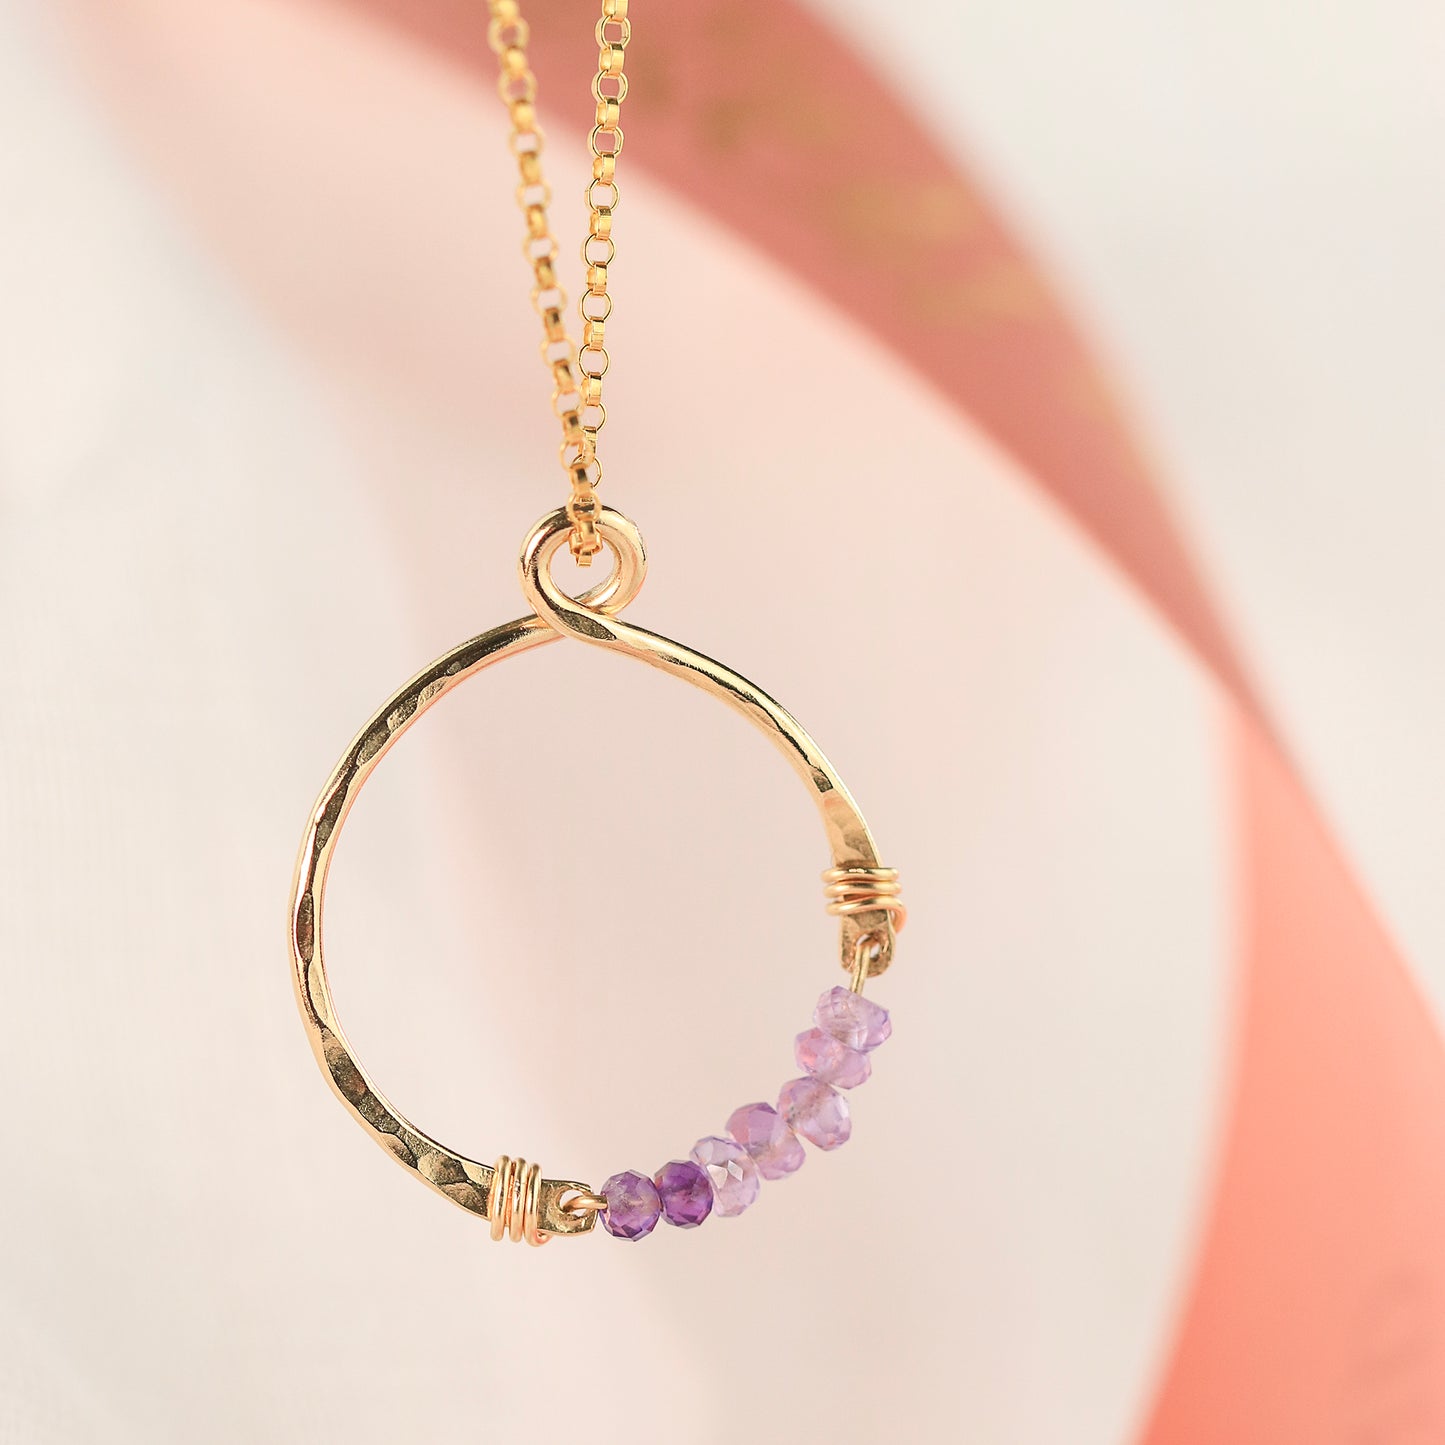 Gift for Daughter - Infinity Necklace with Birthstone - Silver & Gold